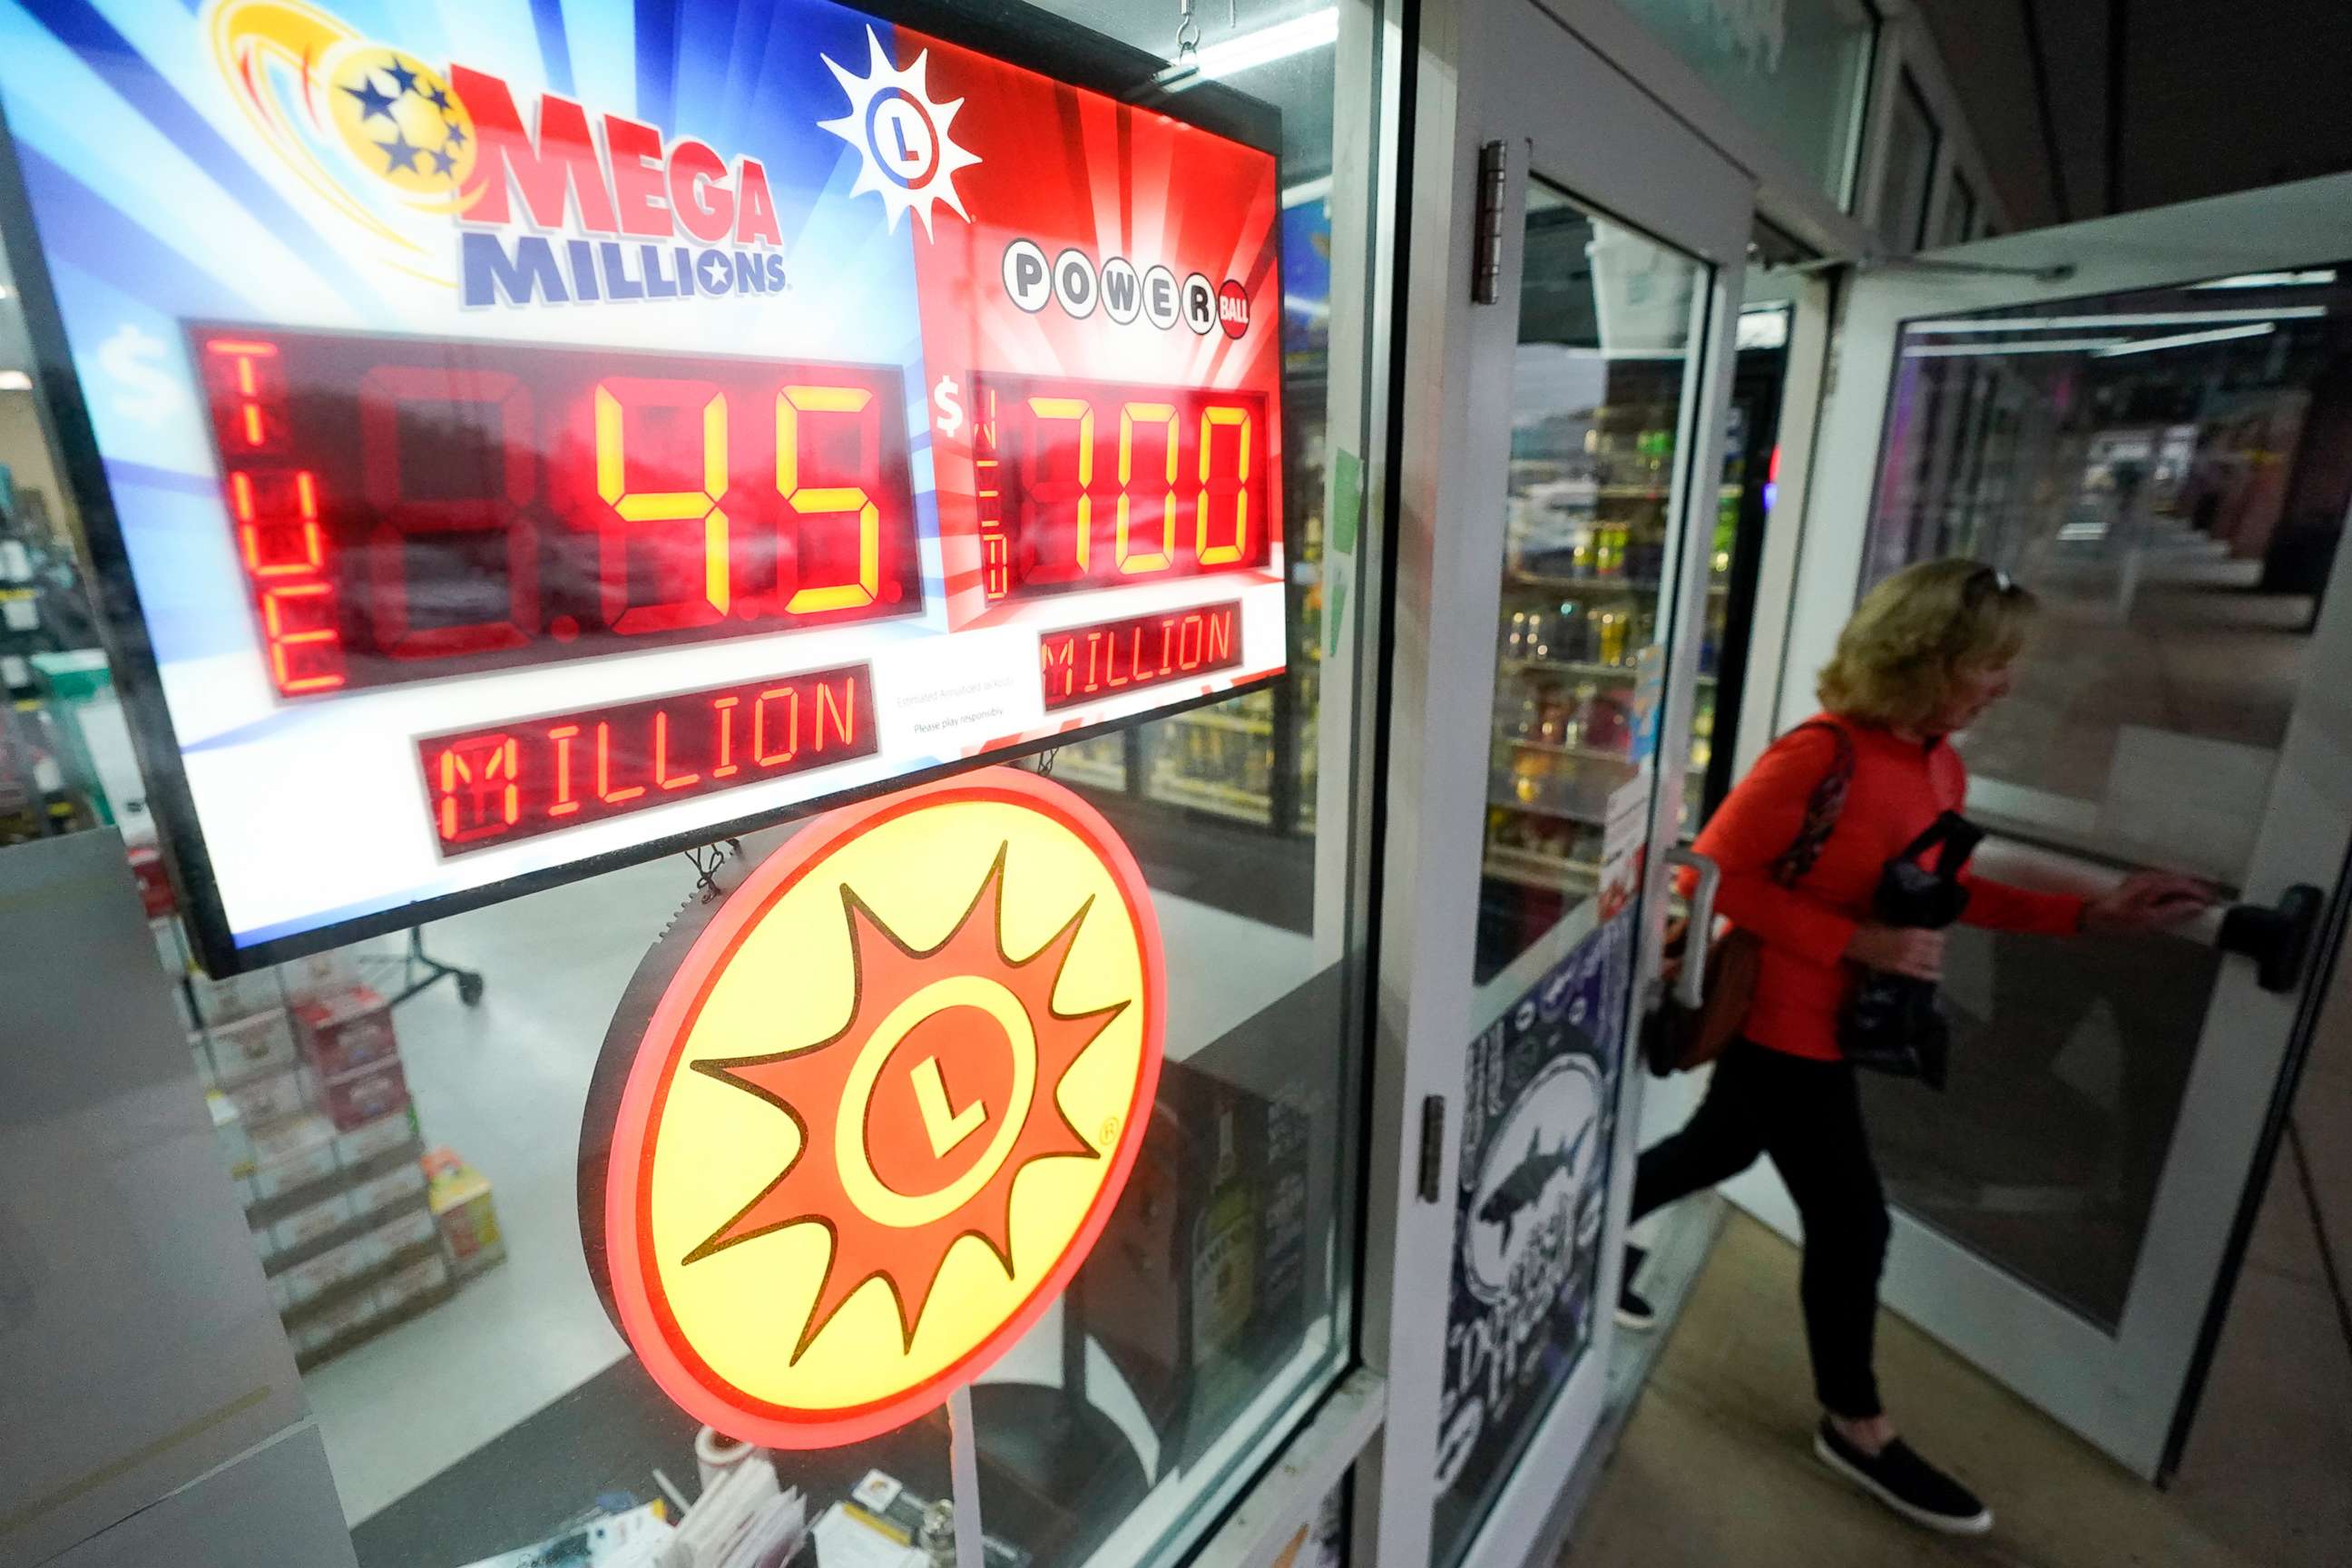 PHOTO: A patron leaves a liquor store as lottery jackpot signs are visible, Oct. 25, 2022, in Baltimore.